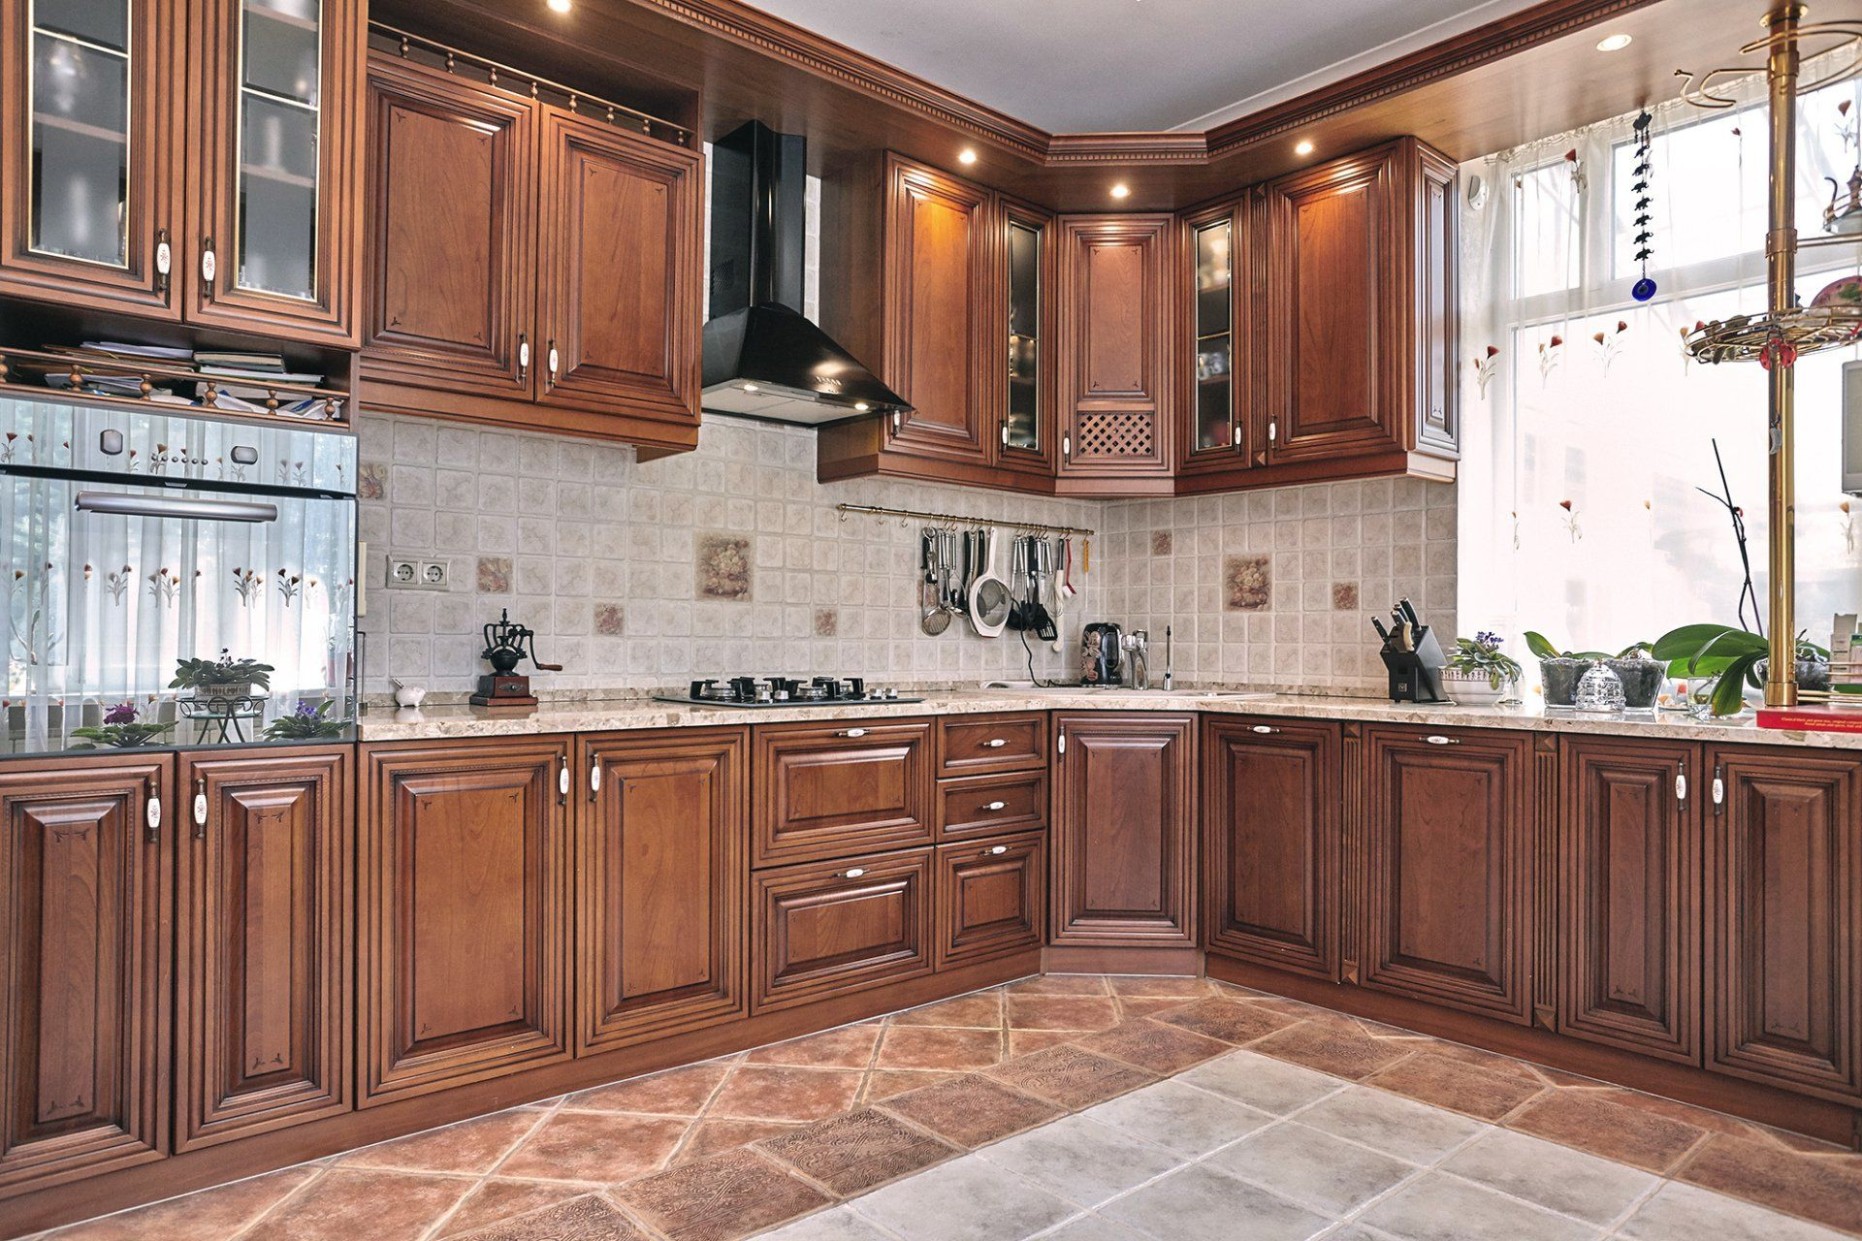 Cabinet Companies Kingsville, MD - cabinet wholesalers in maryland